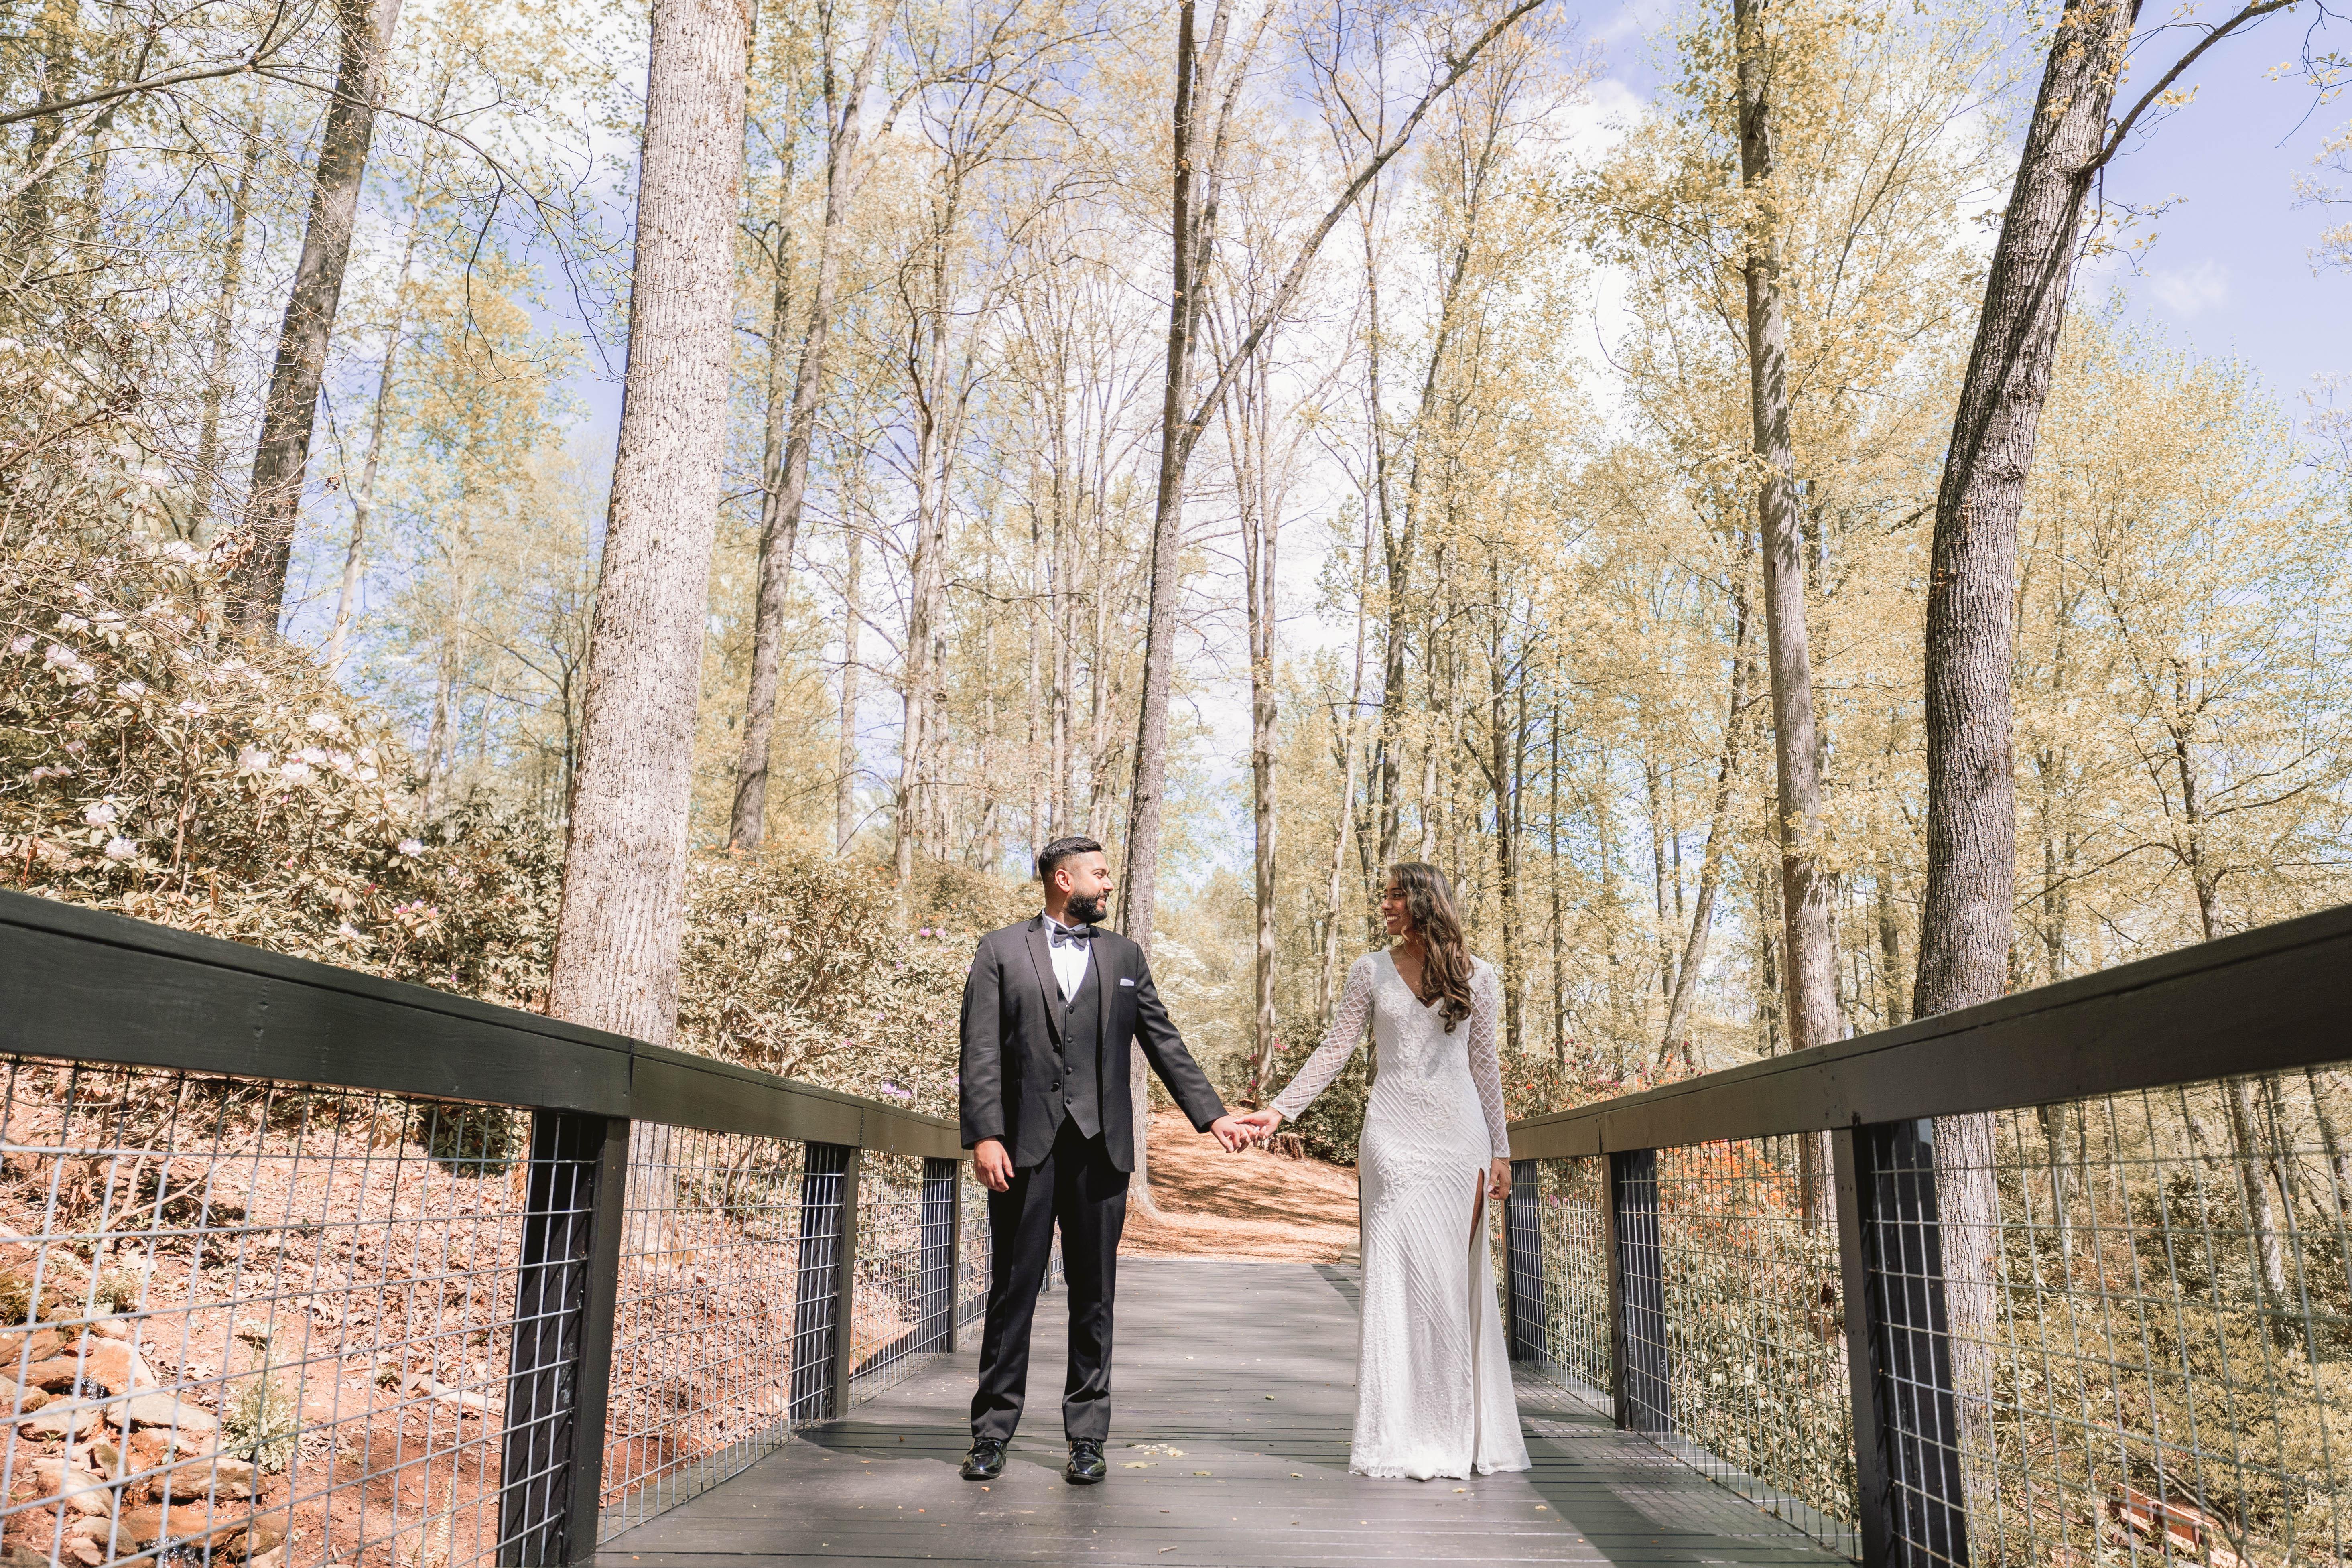 The Wedding Website of Christopher Williams and Judi Thomas